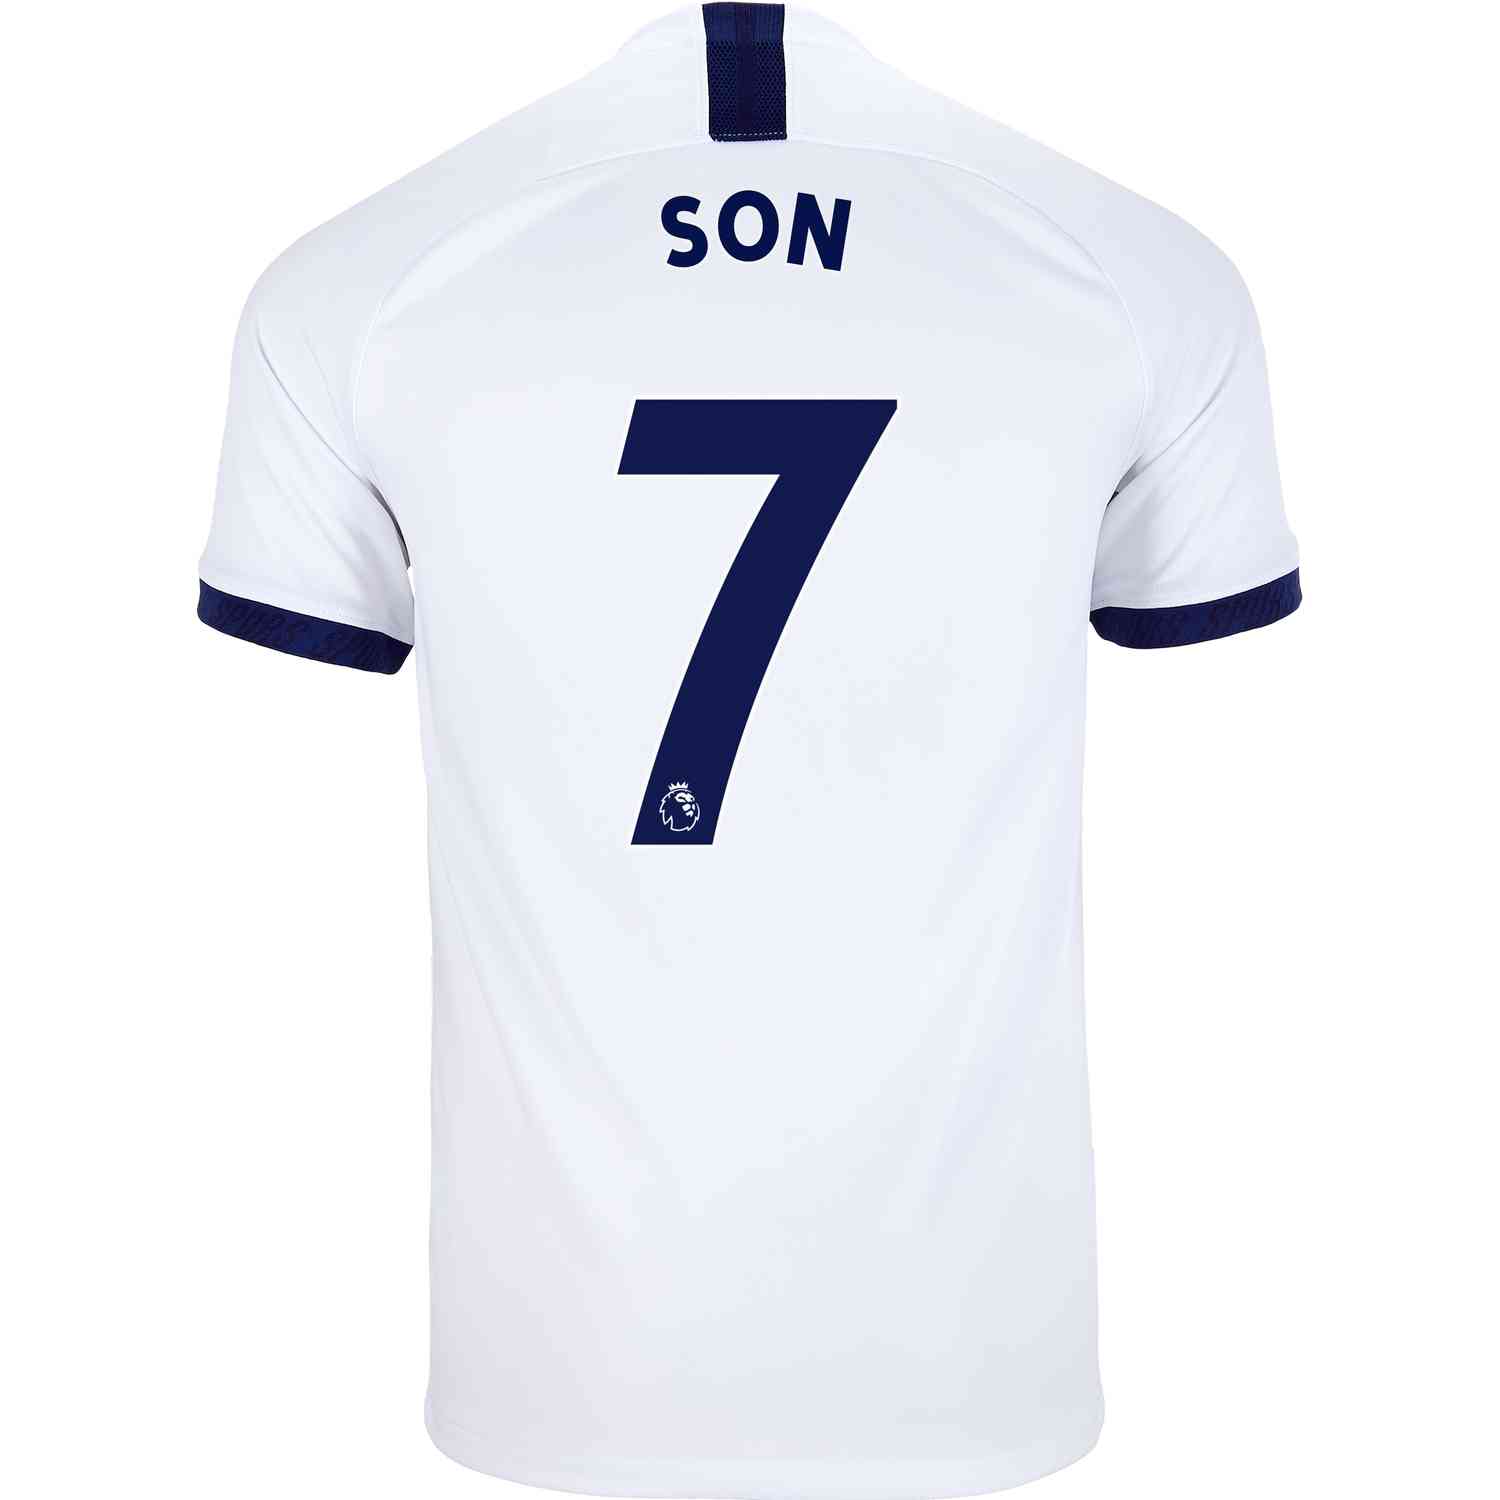 son heung min youth jersey